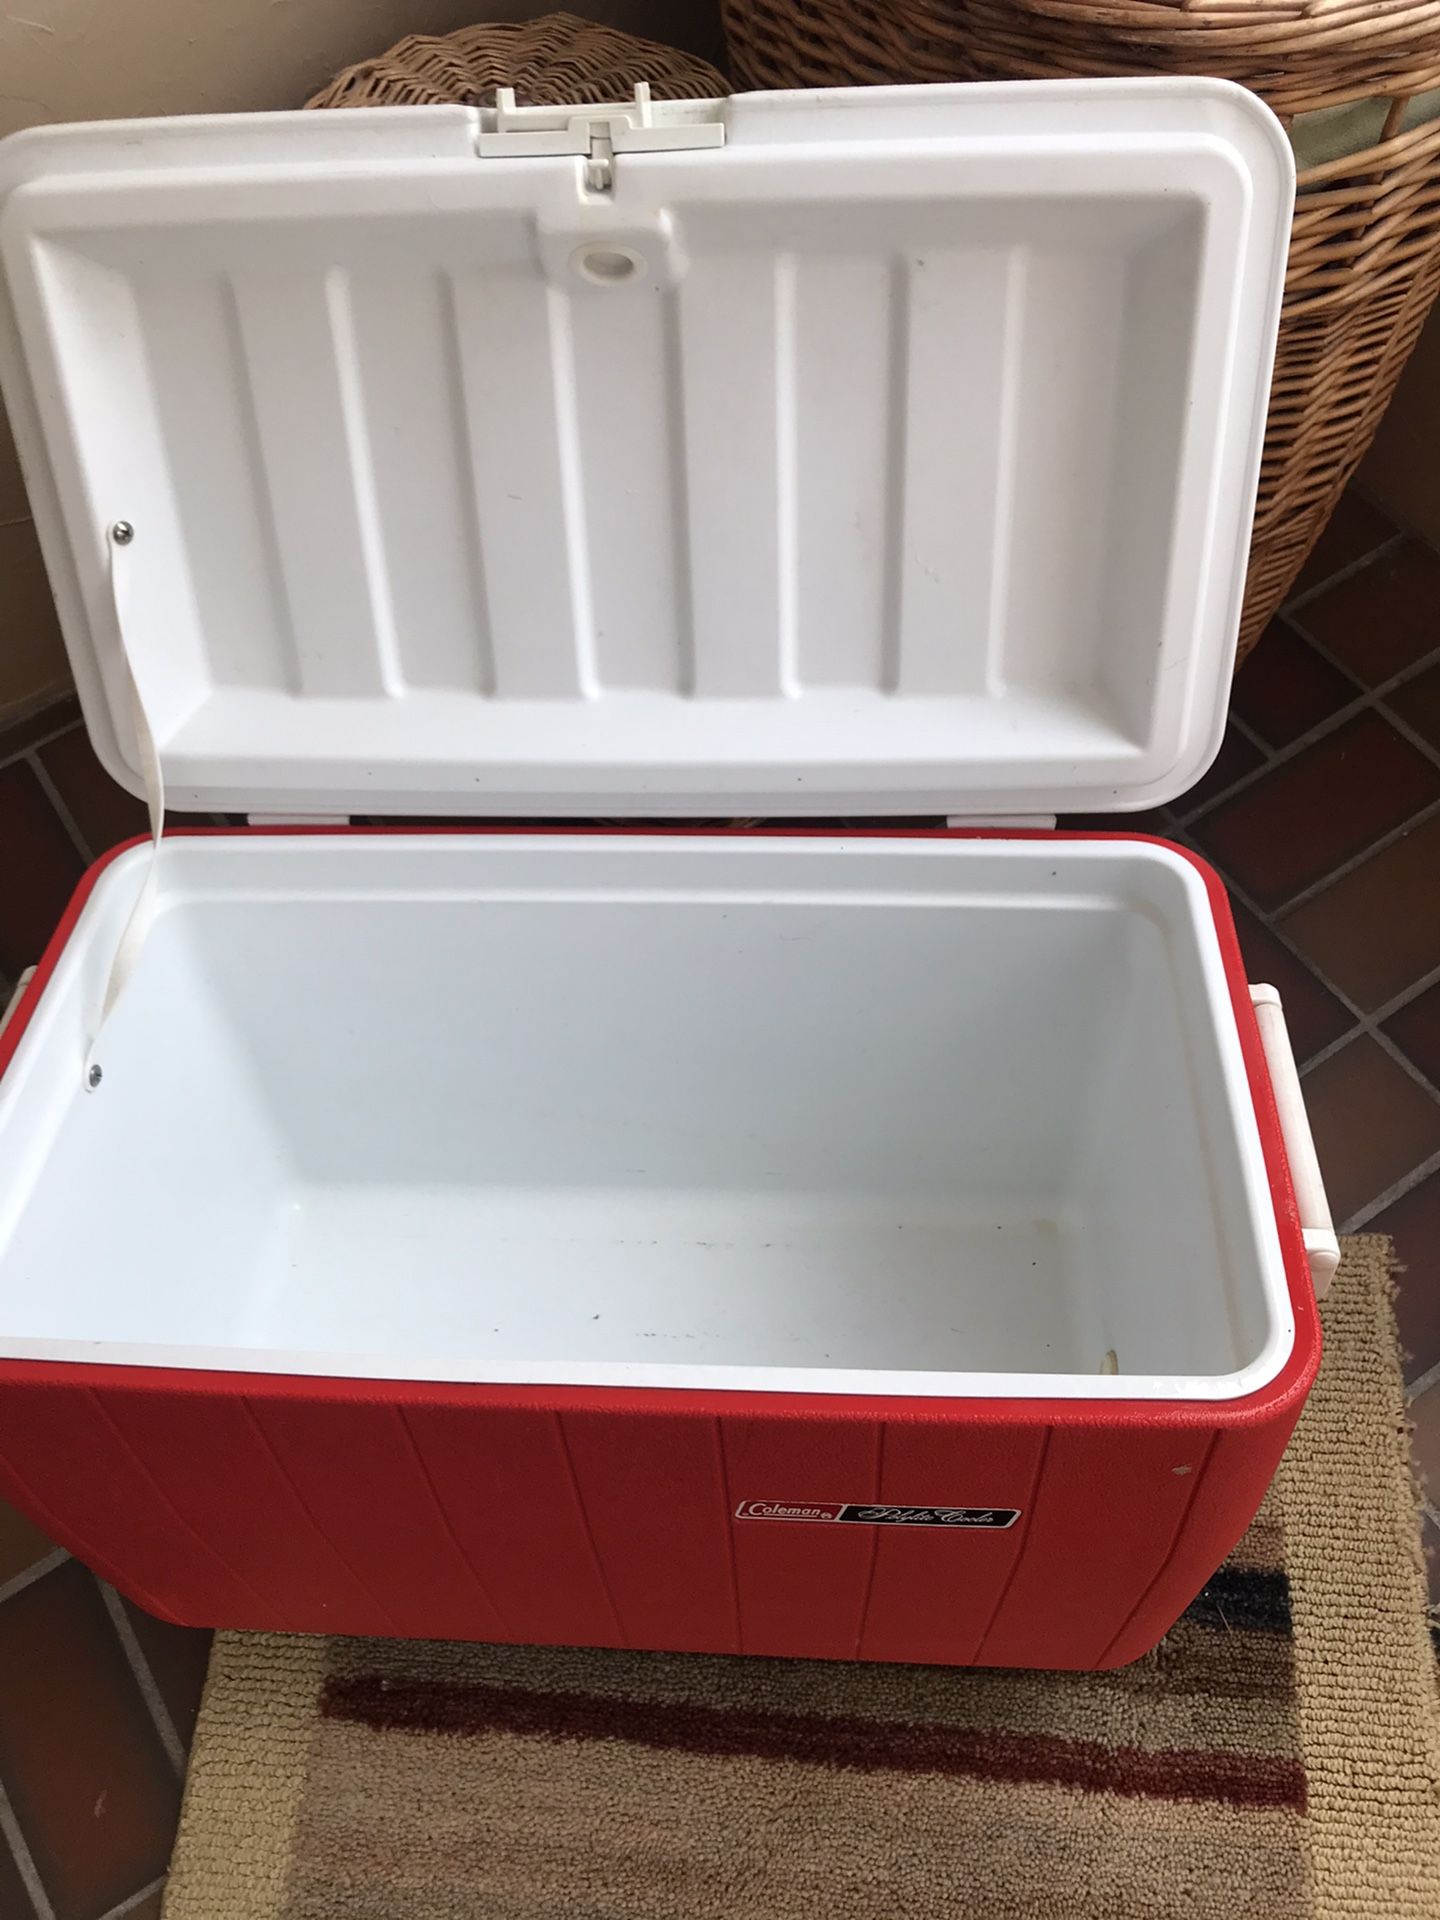 Cooler! 25x14x14.5 approx just in time got party time drinks!